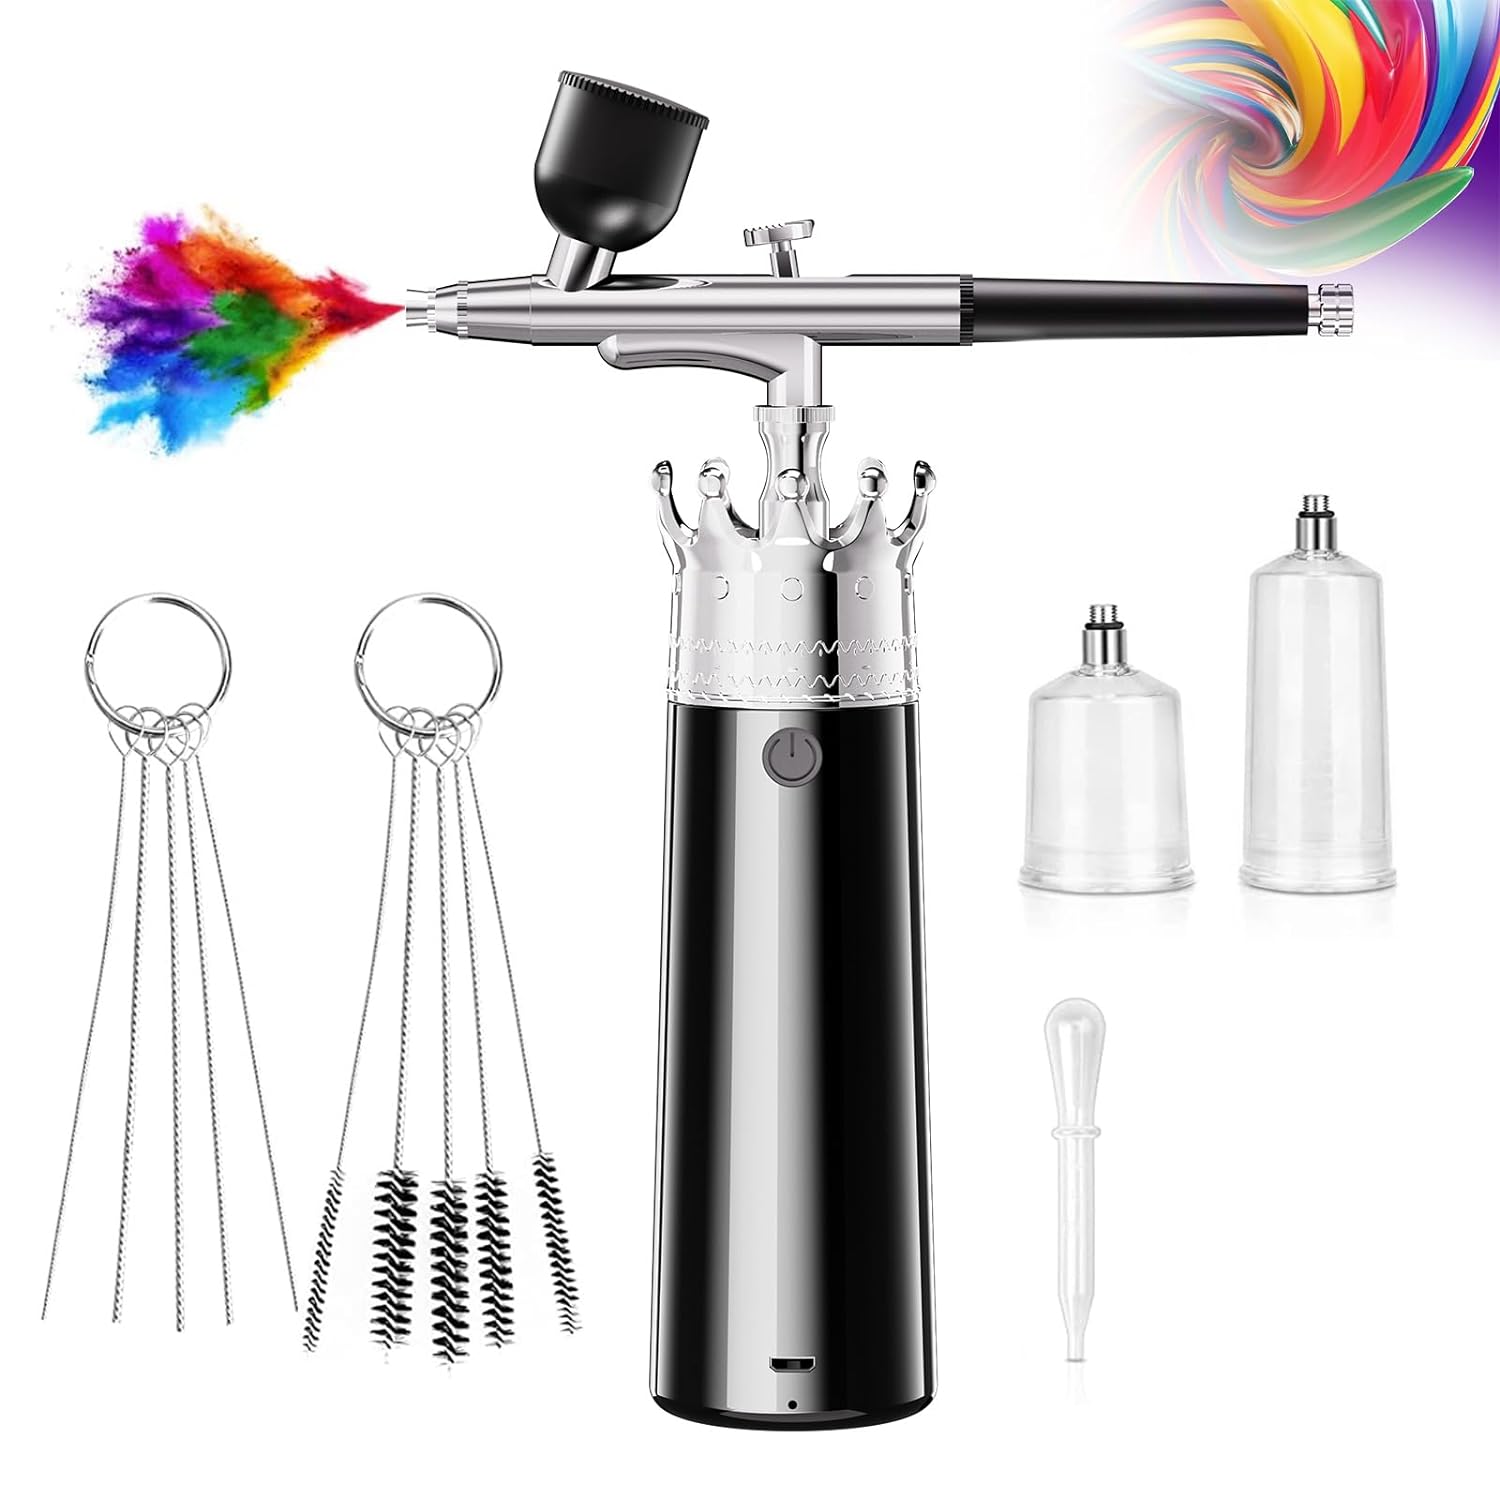 Airbrush Kit Portable Airbrush kit With Compressor Nail Charms Rechargeable Wireless Air Brush Gun for Barber, Nail Art, Cake Decor, Makeup, Model Painting (Black)